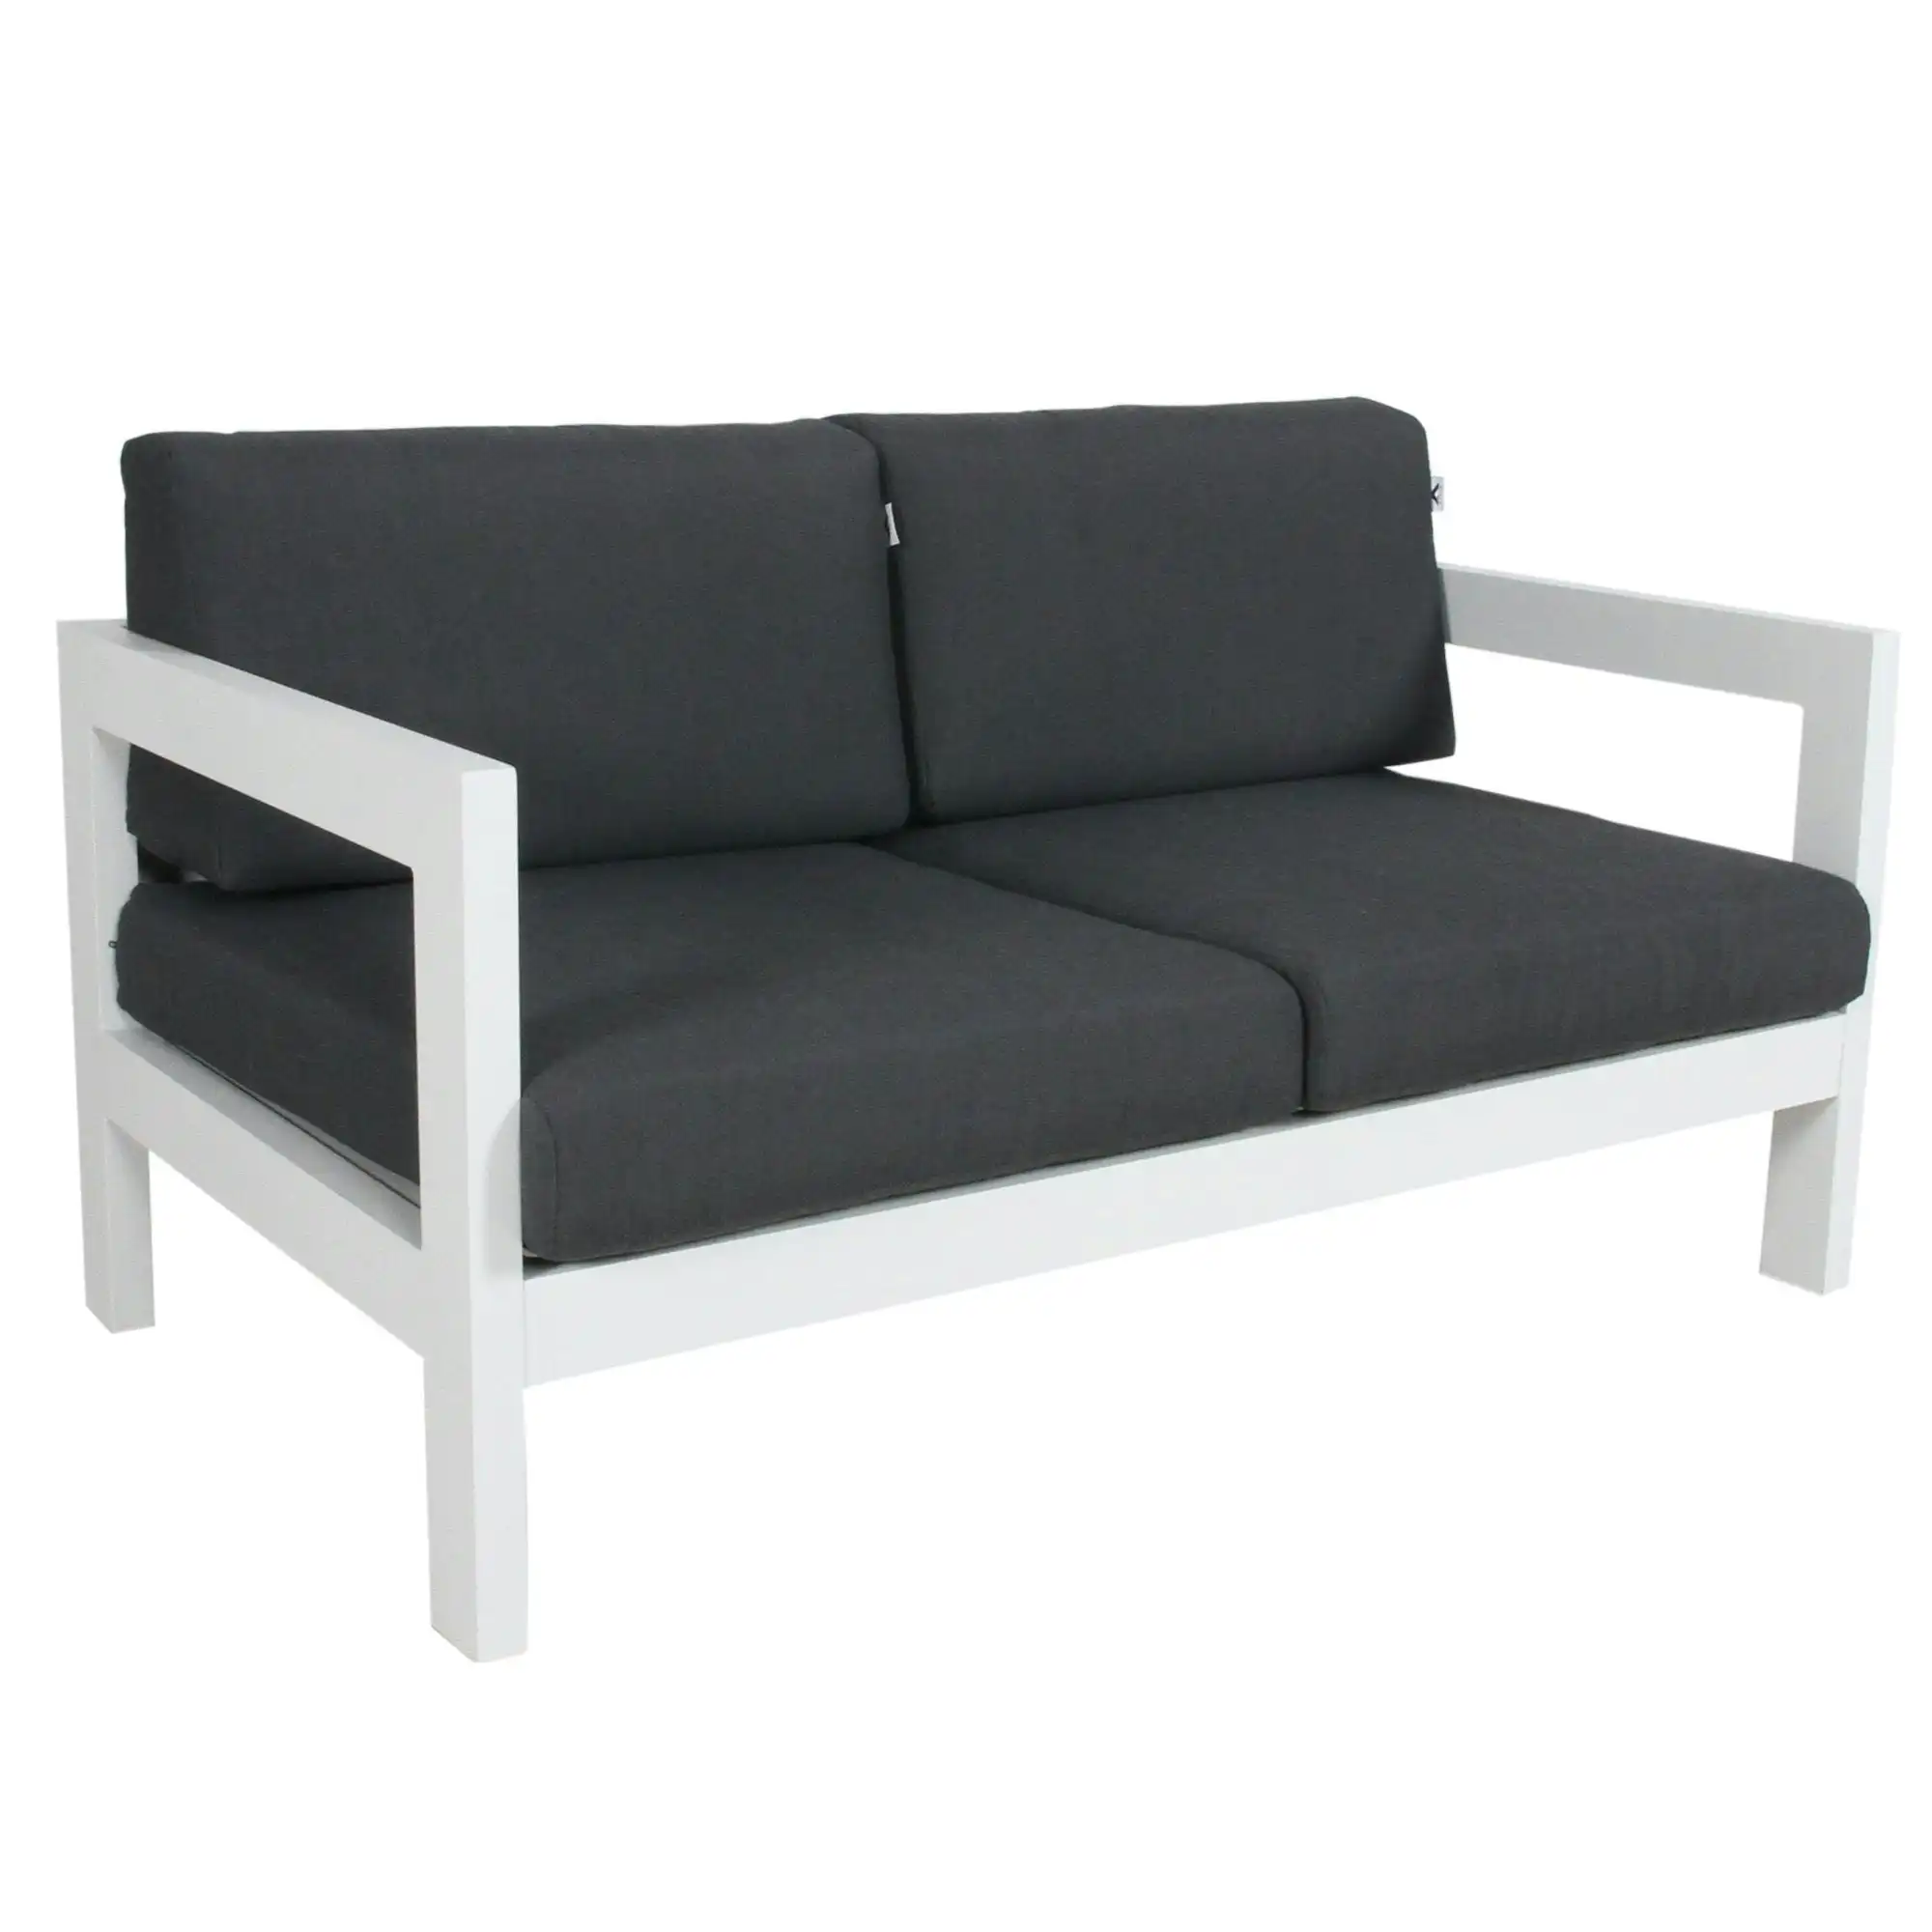 Outie 2 Seater Outdoor Sofa Lounge